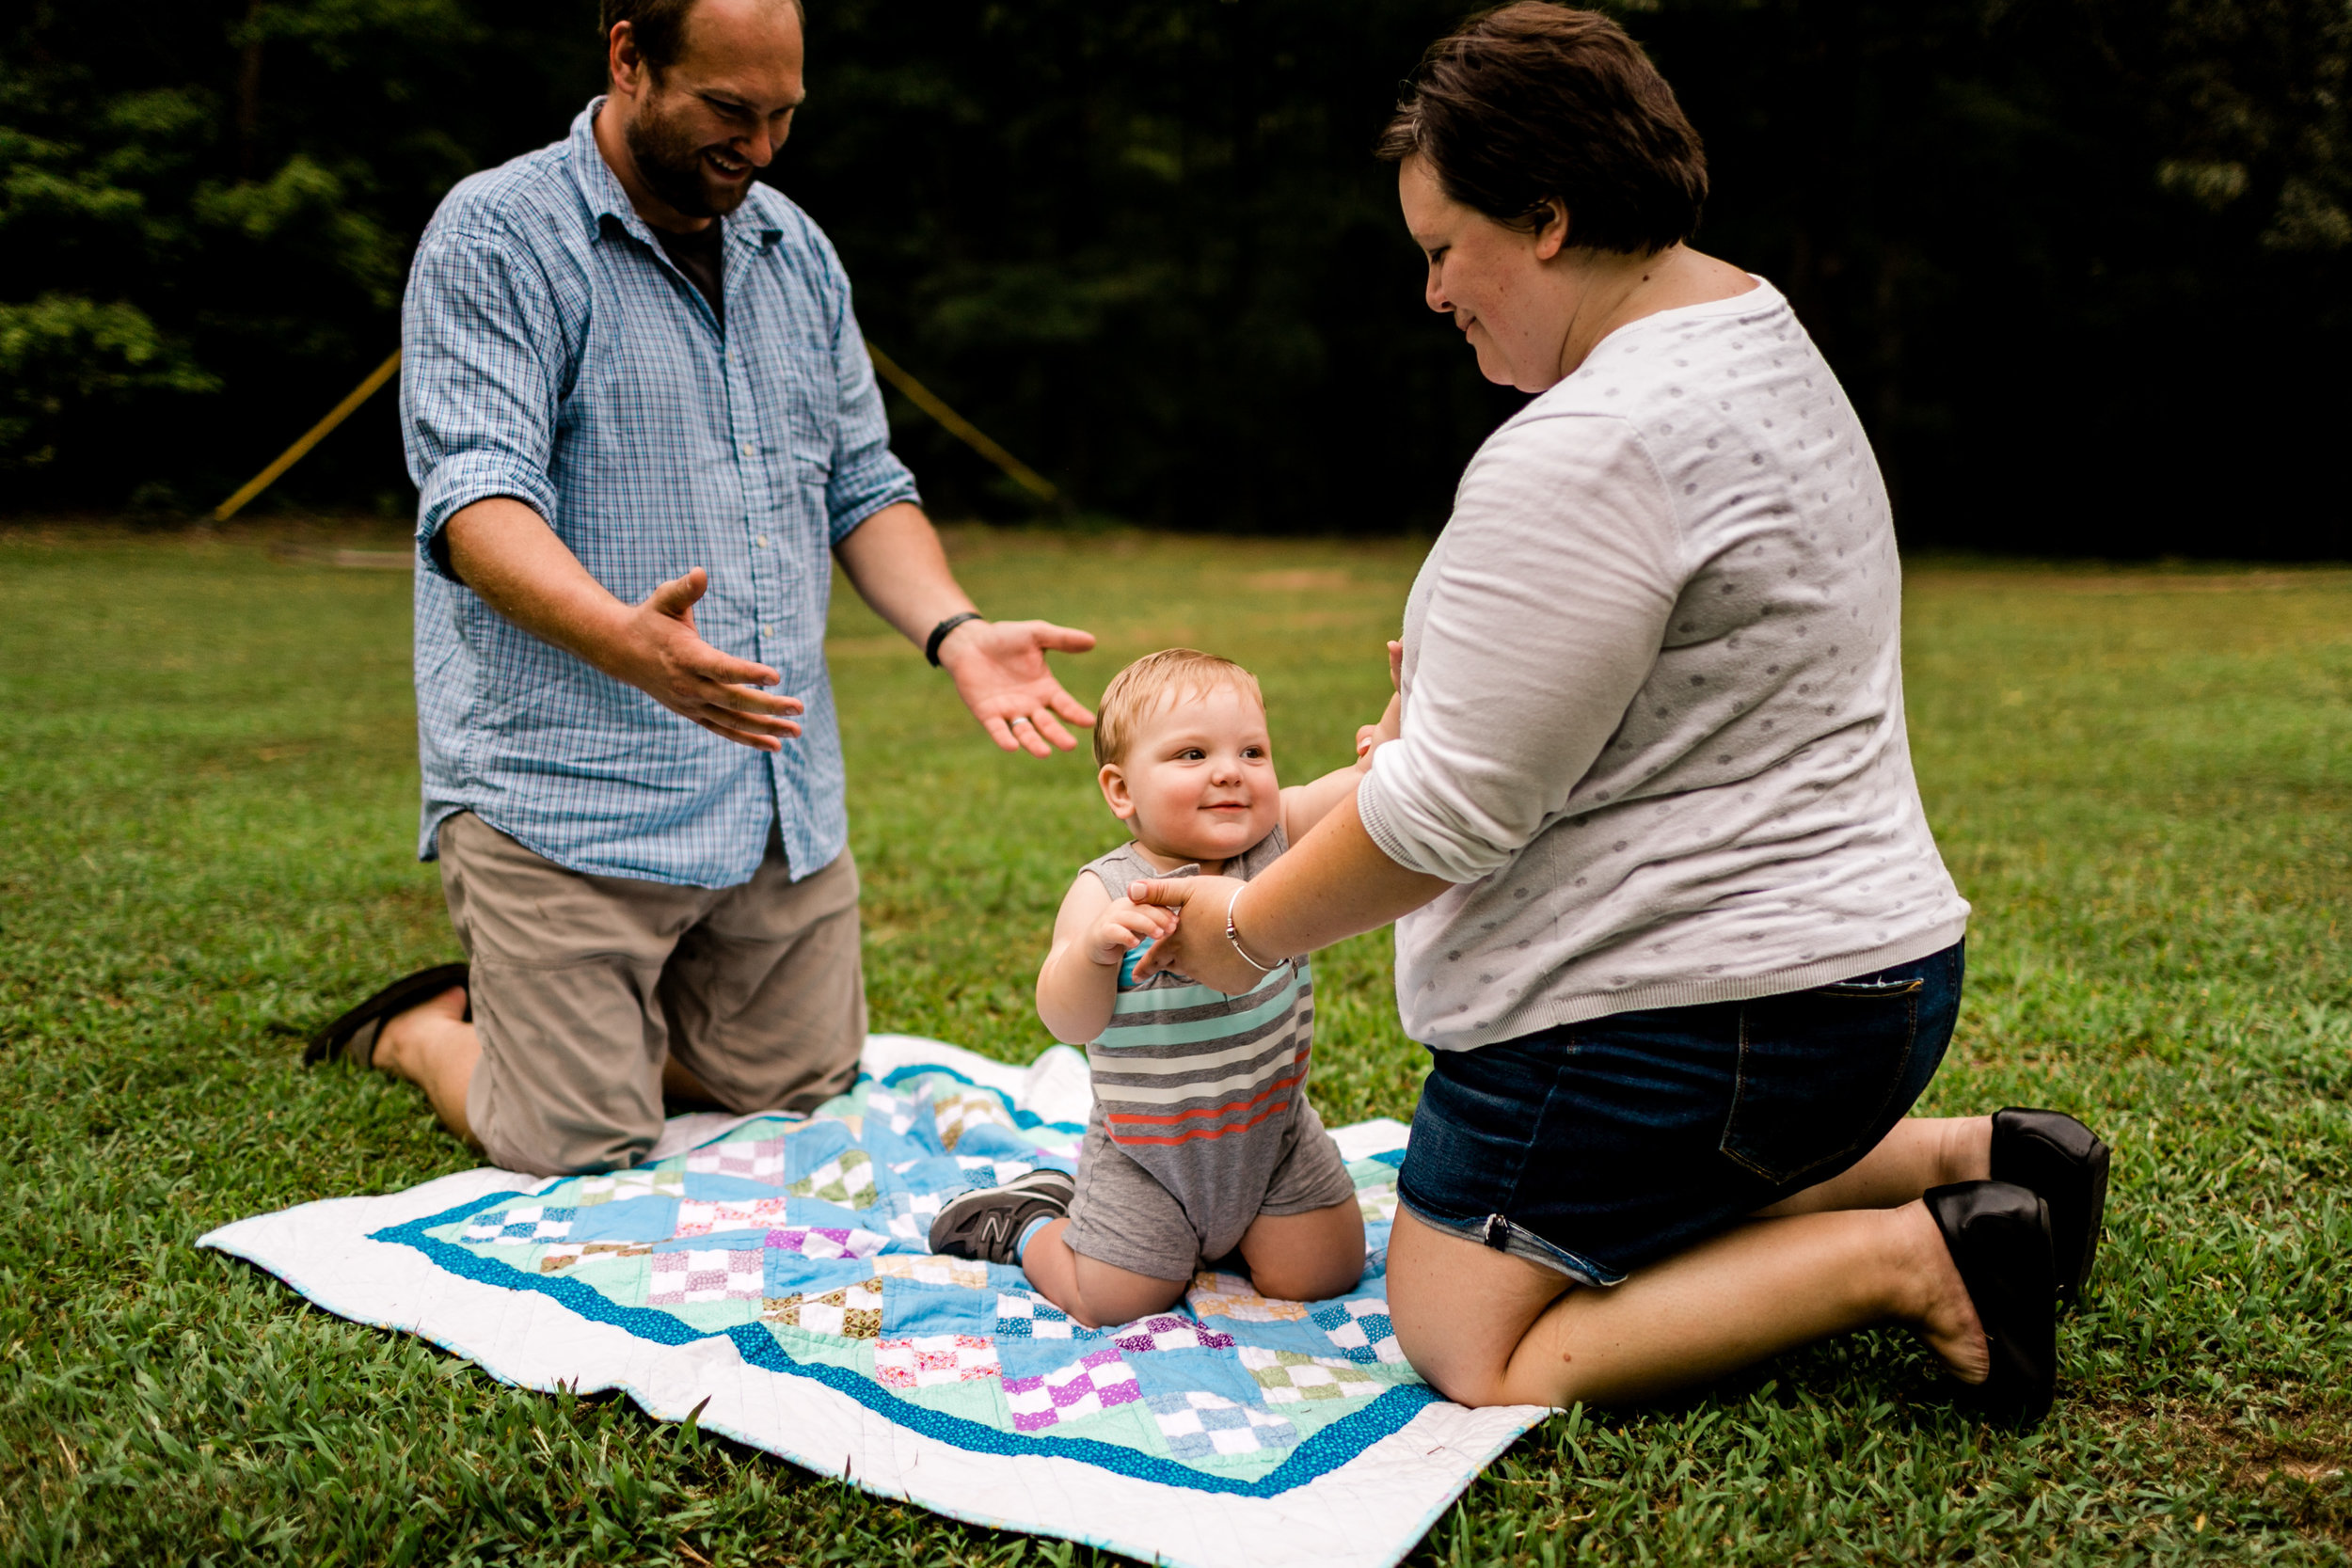 Durham Family Photography at Spurce Pine Lodge | By G. Lin Photography | Family on blanket outside